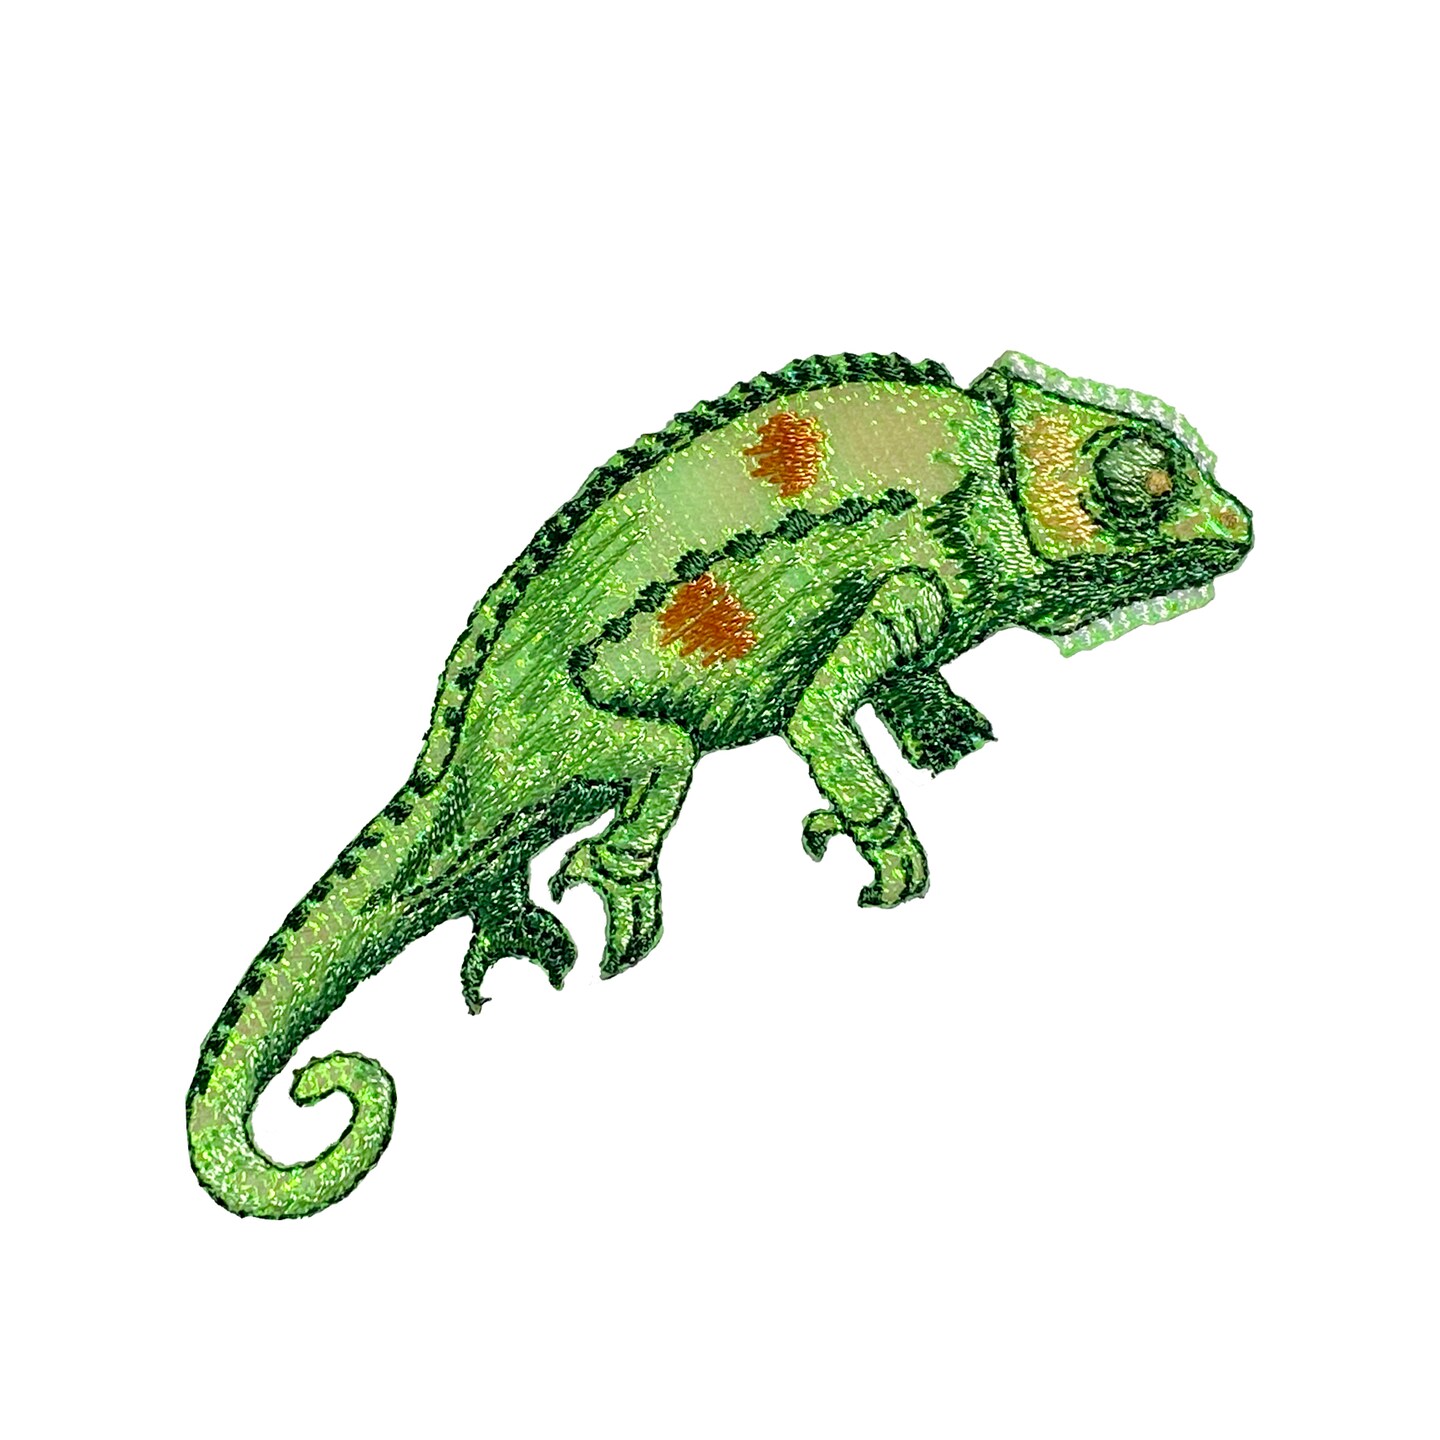 Green Shimmery Chameleon, Lizard, Facing Right, Embroidered Iron-on Patch